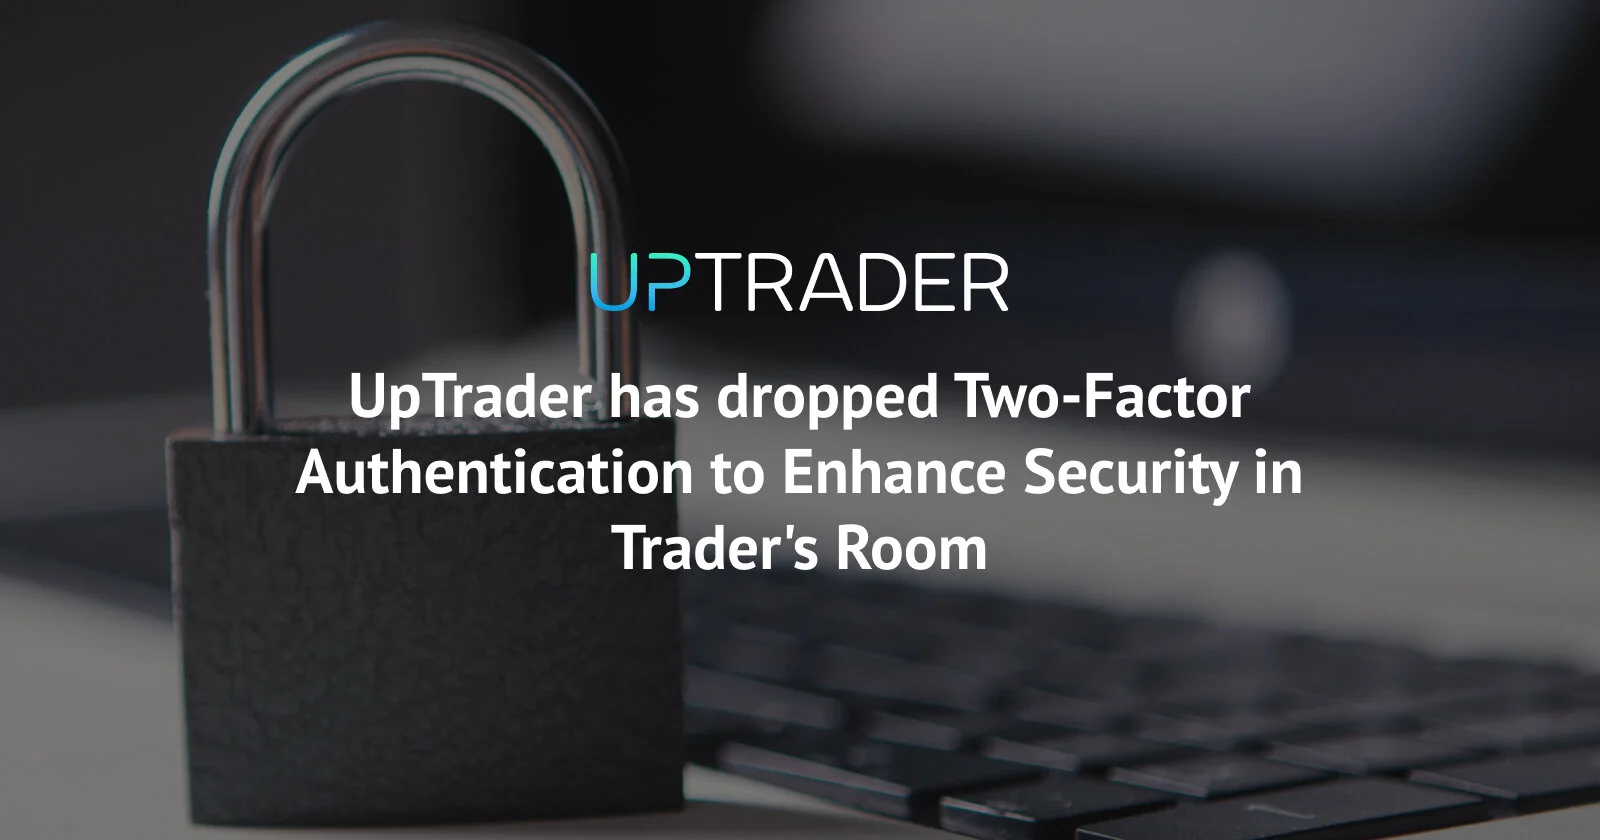 UpTrader has dropped Two-Factor Authentication